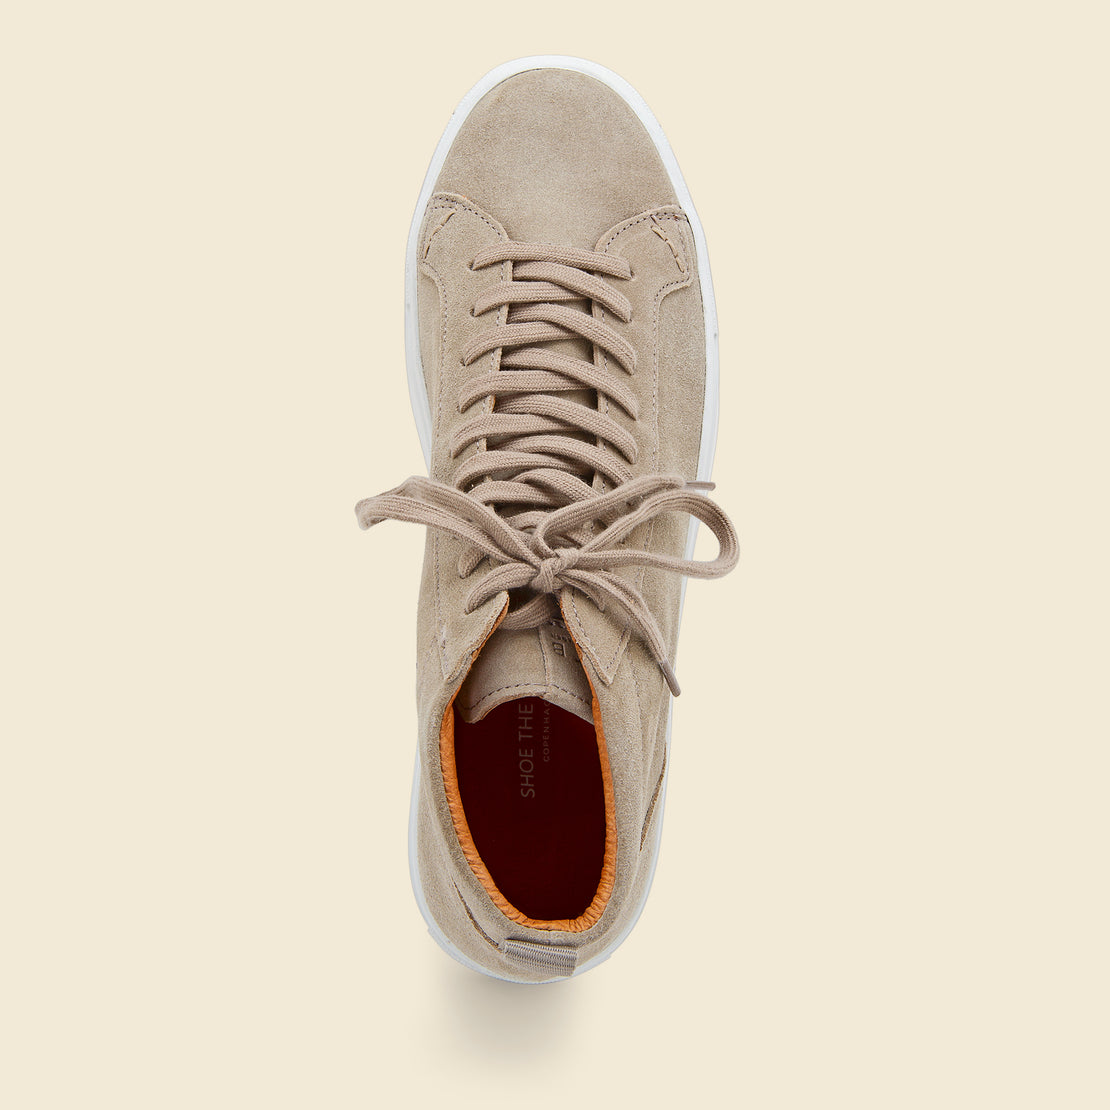 Holmes Suede High Top Sneaker - Sand